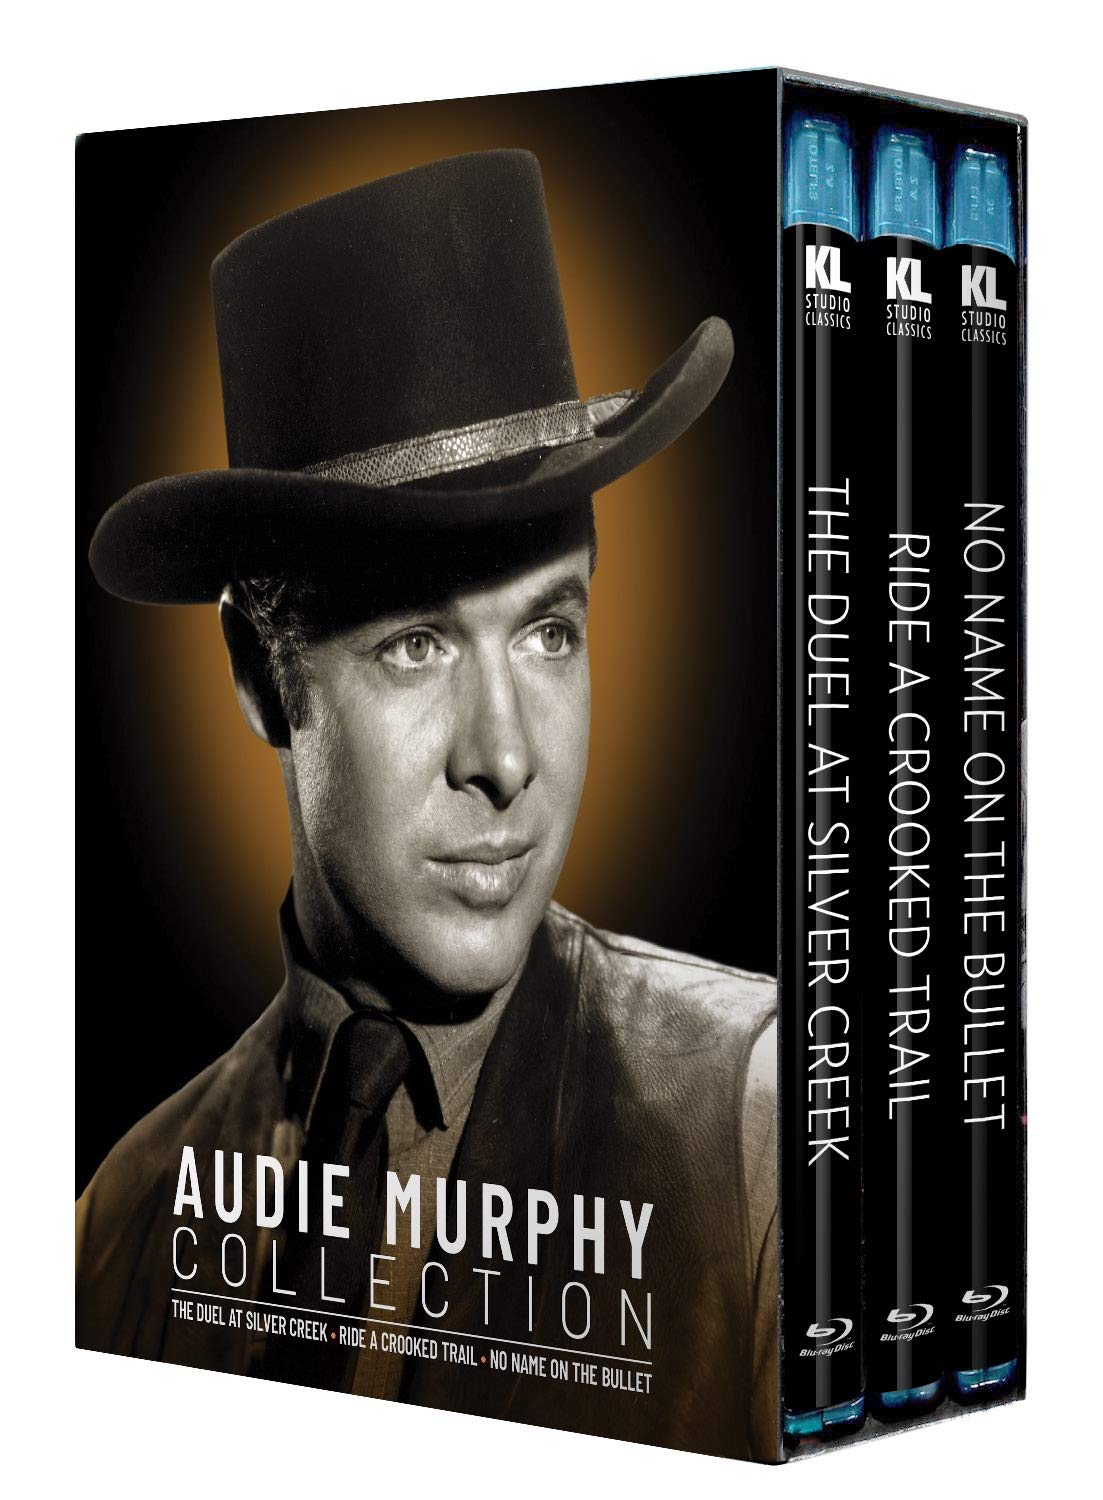 Audie Murphy Collection [The Duel at Silver Creek/Ride a Crooked Trail/No Name on the Bullet] [Blu-ray]